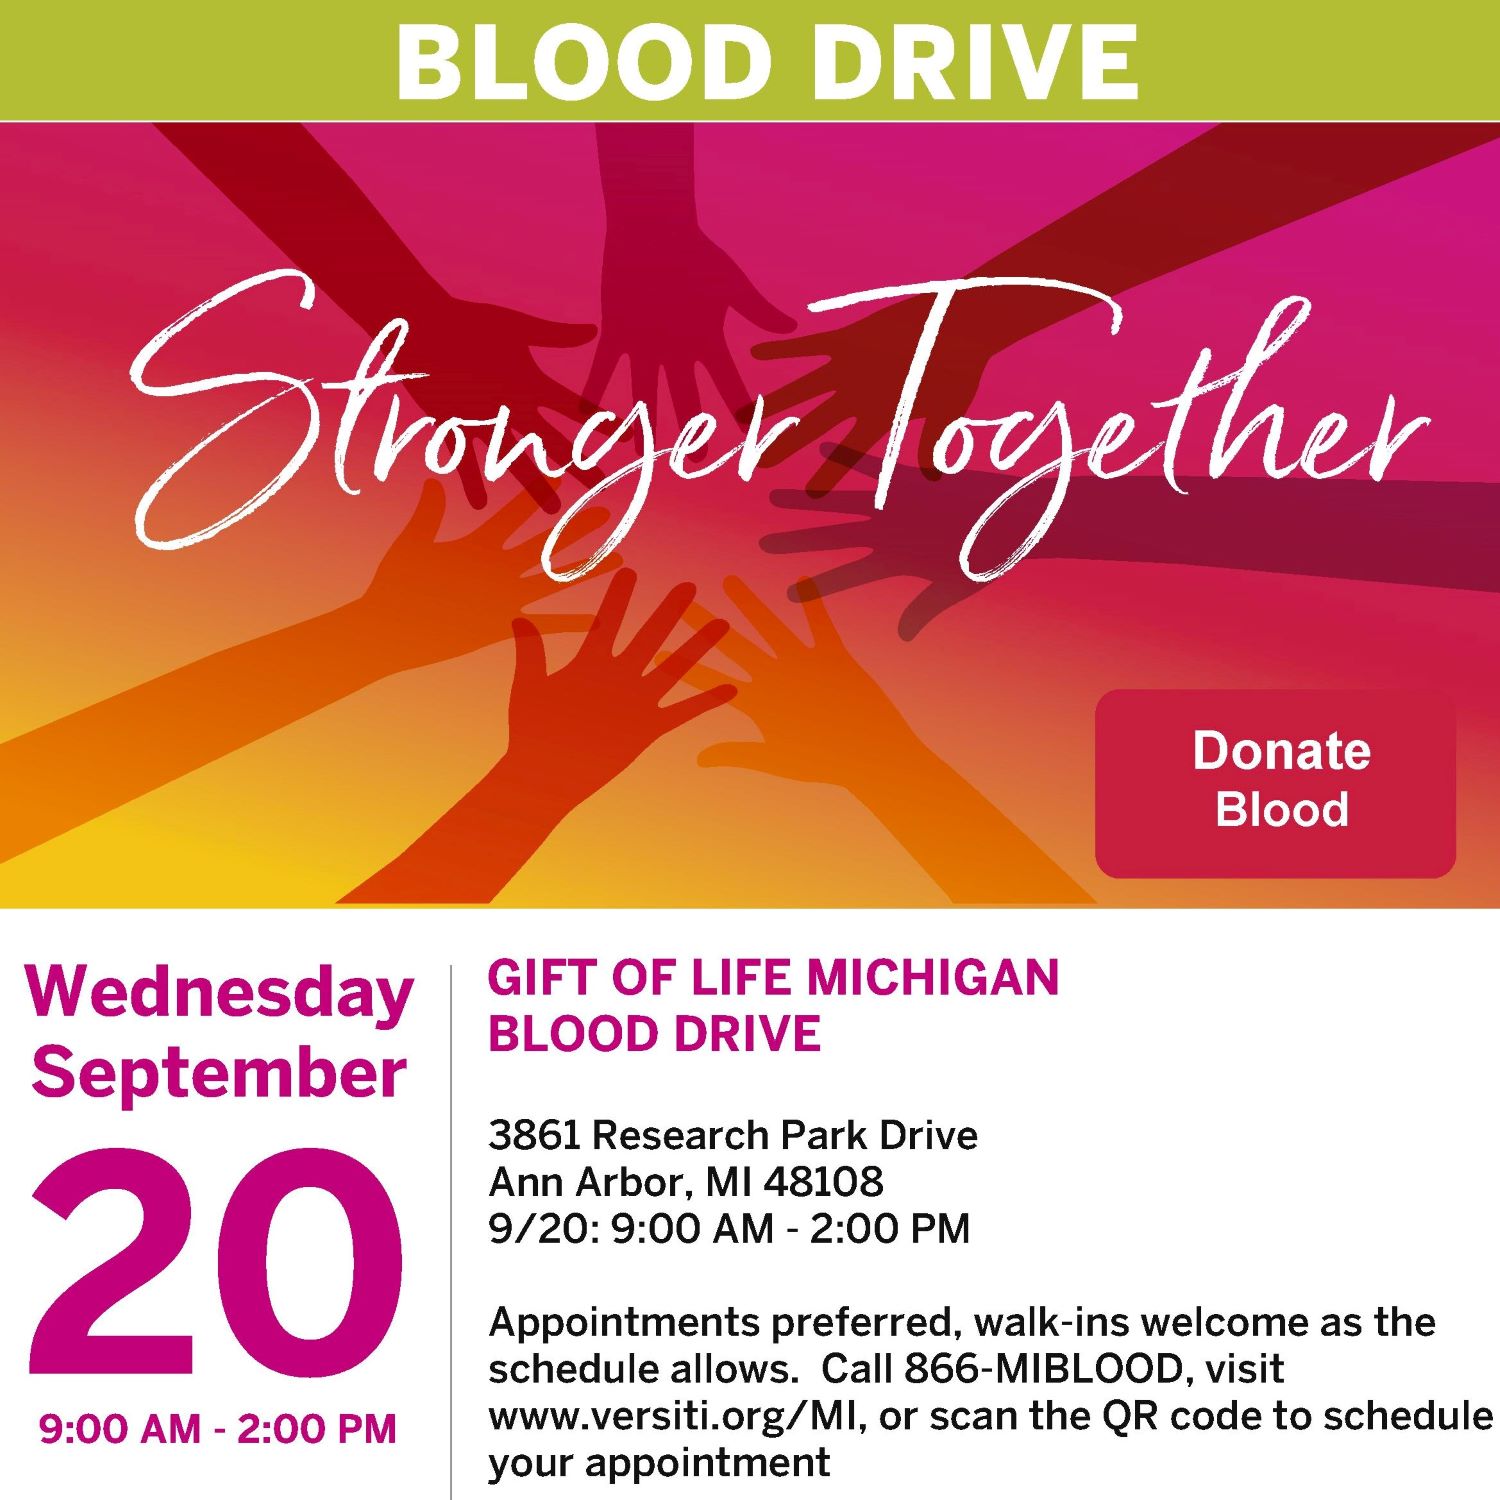 Blood drive flyer - Weds, September 20 from 9am - 2pm at Gift of Life Michigan